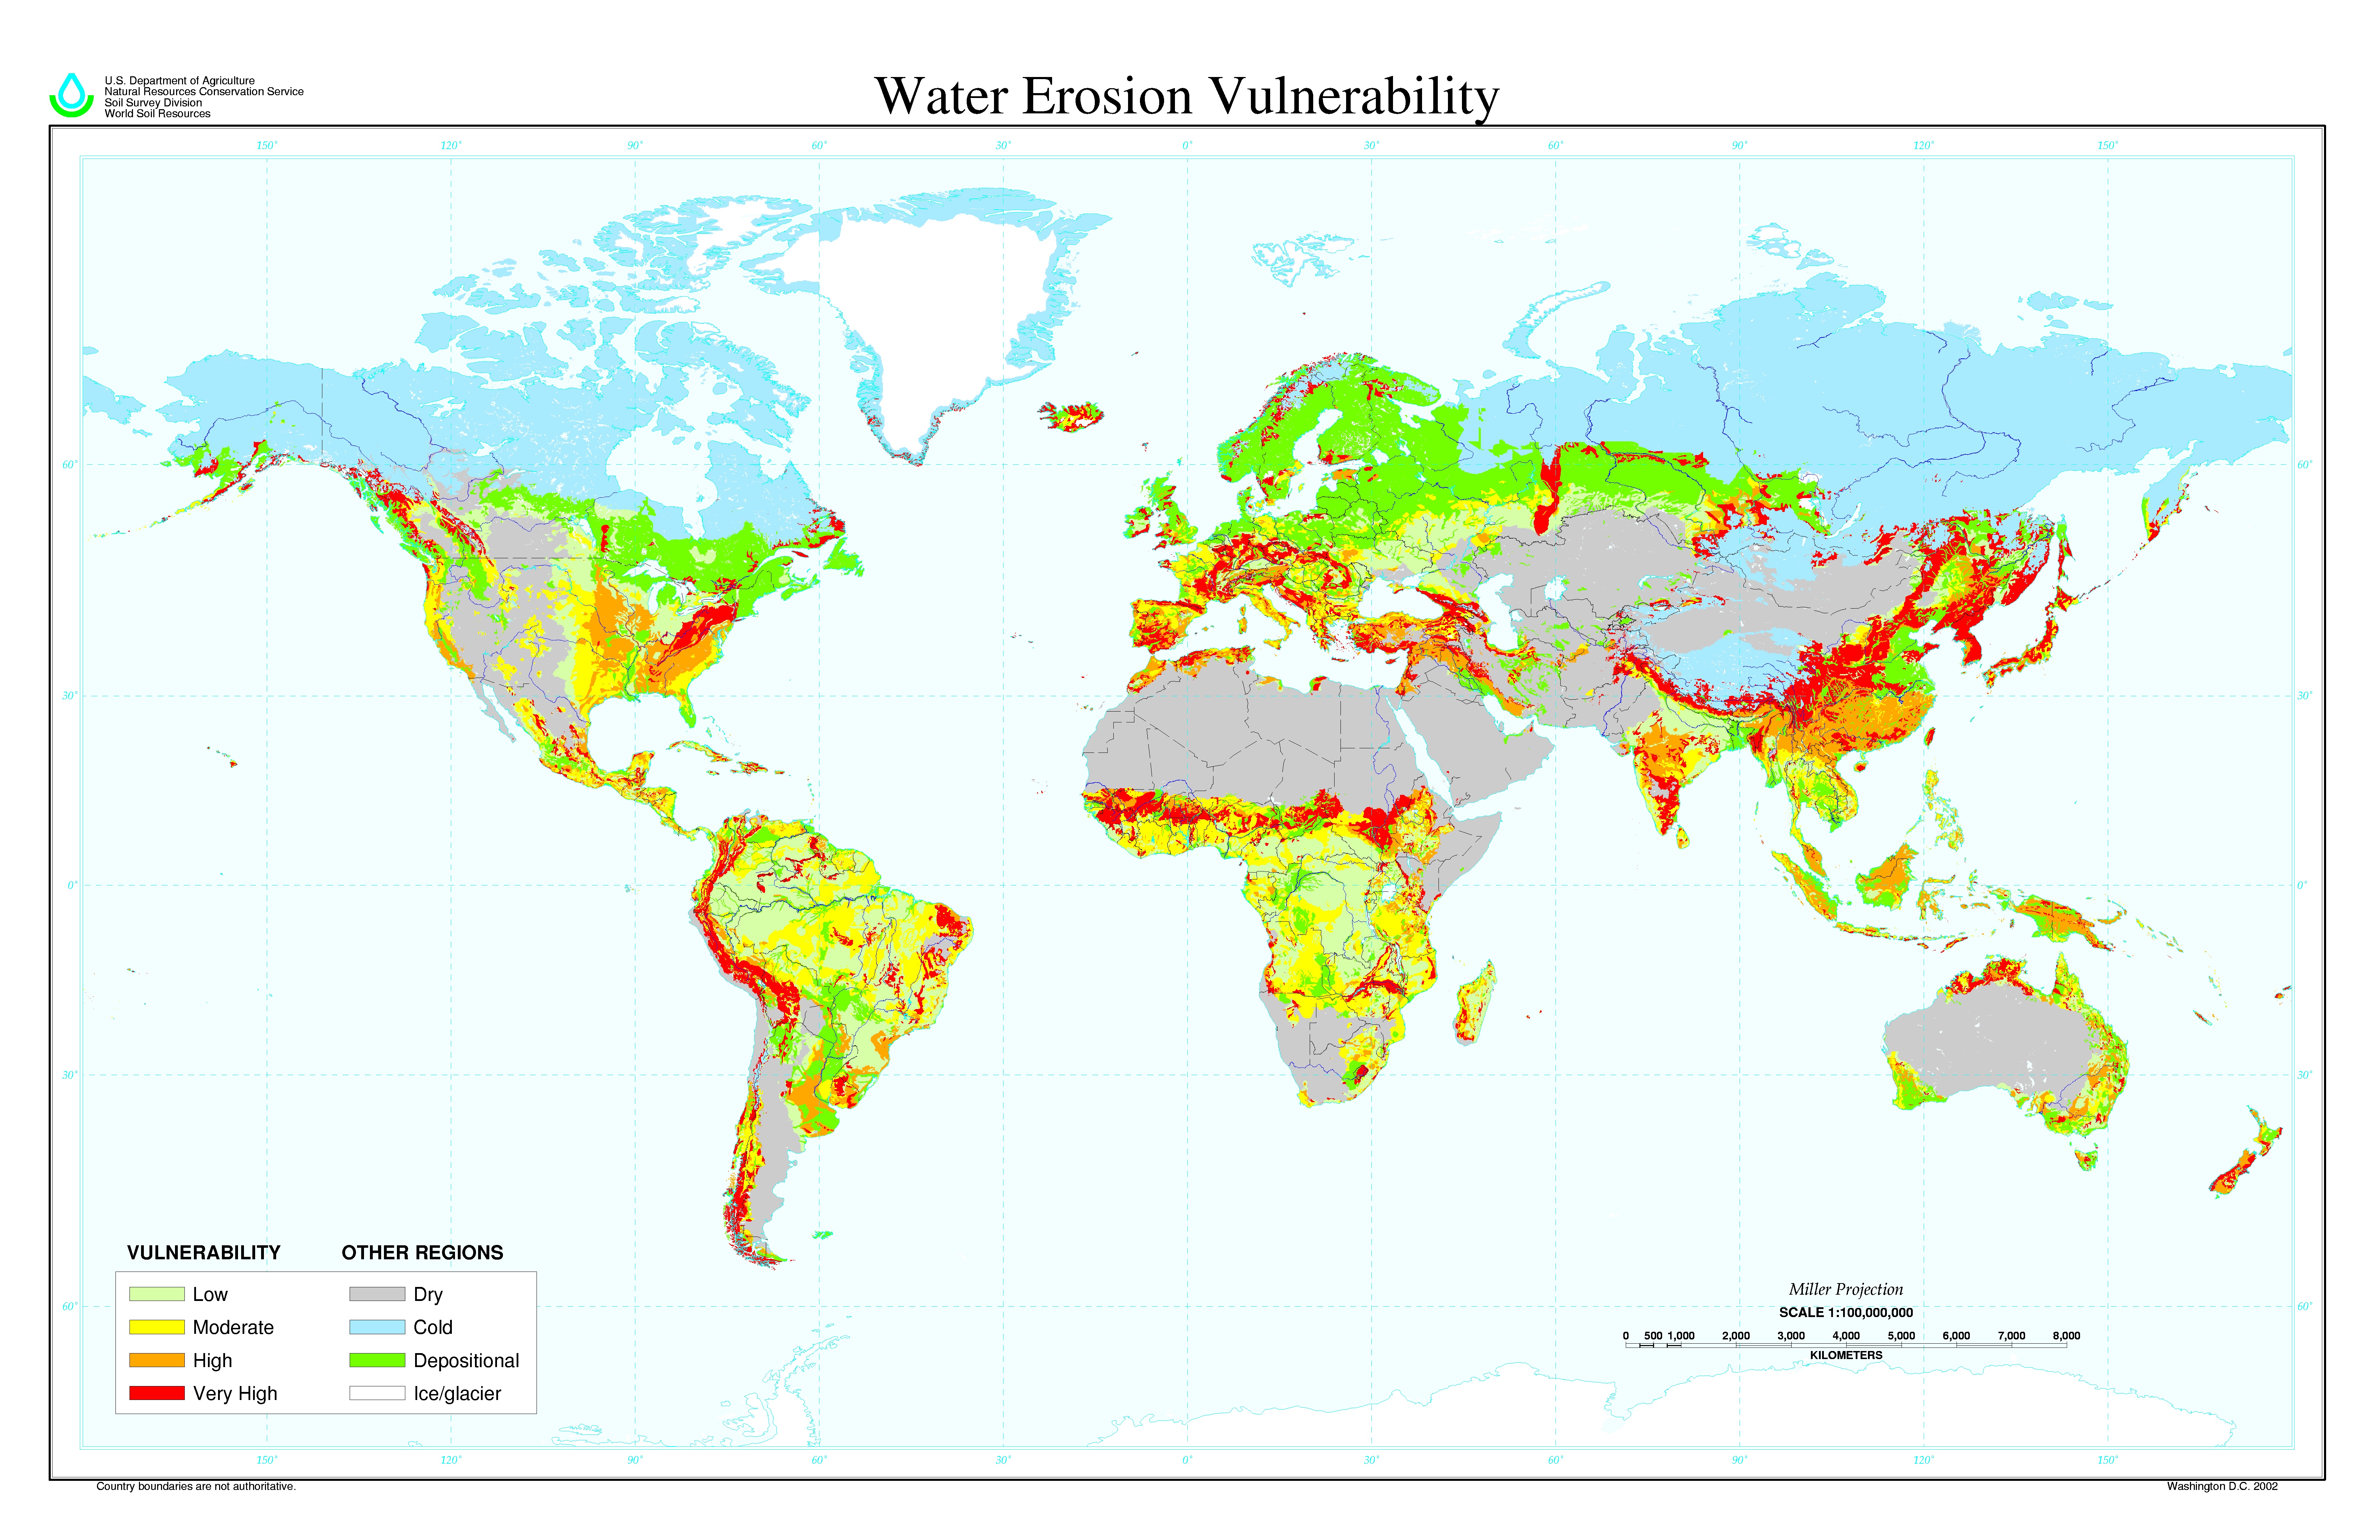 A world map identifying areas vulnerable to water erosion